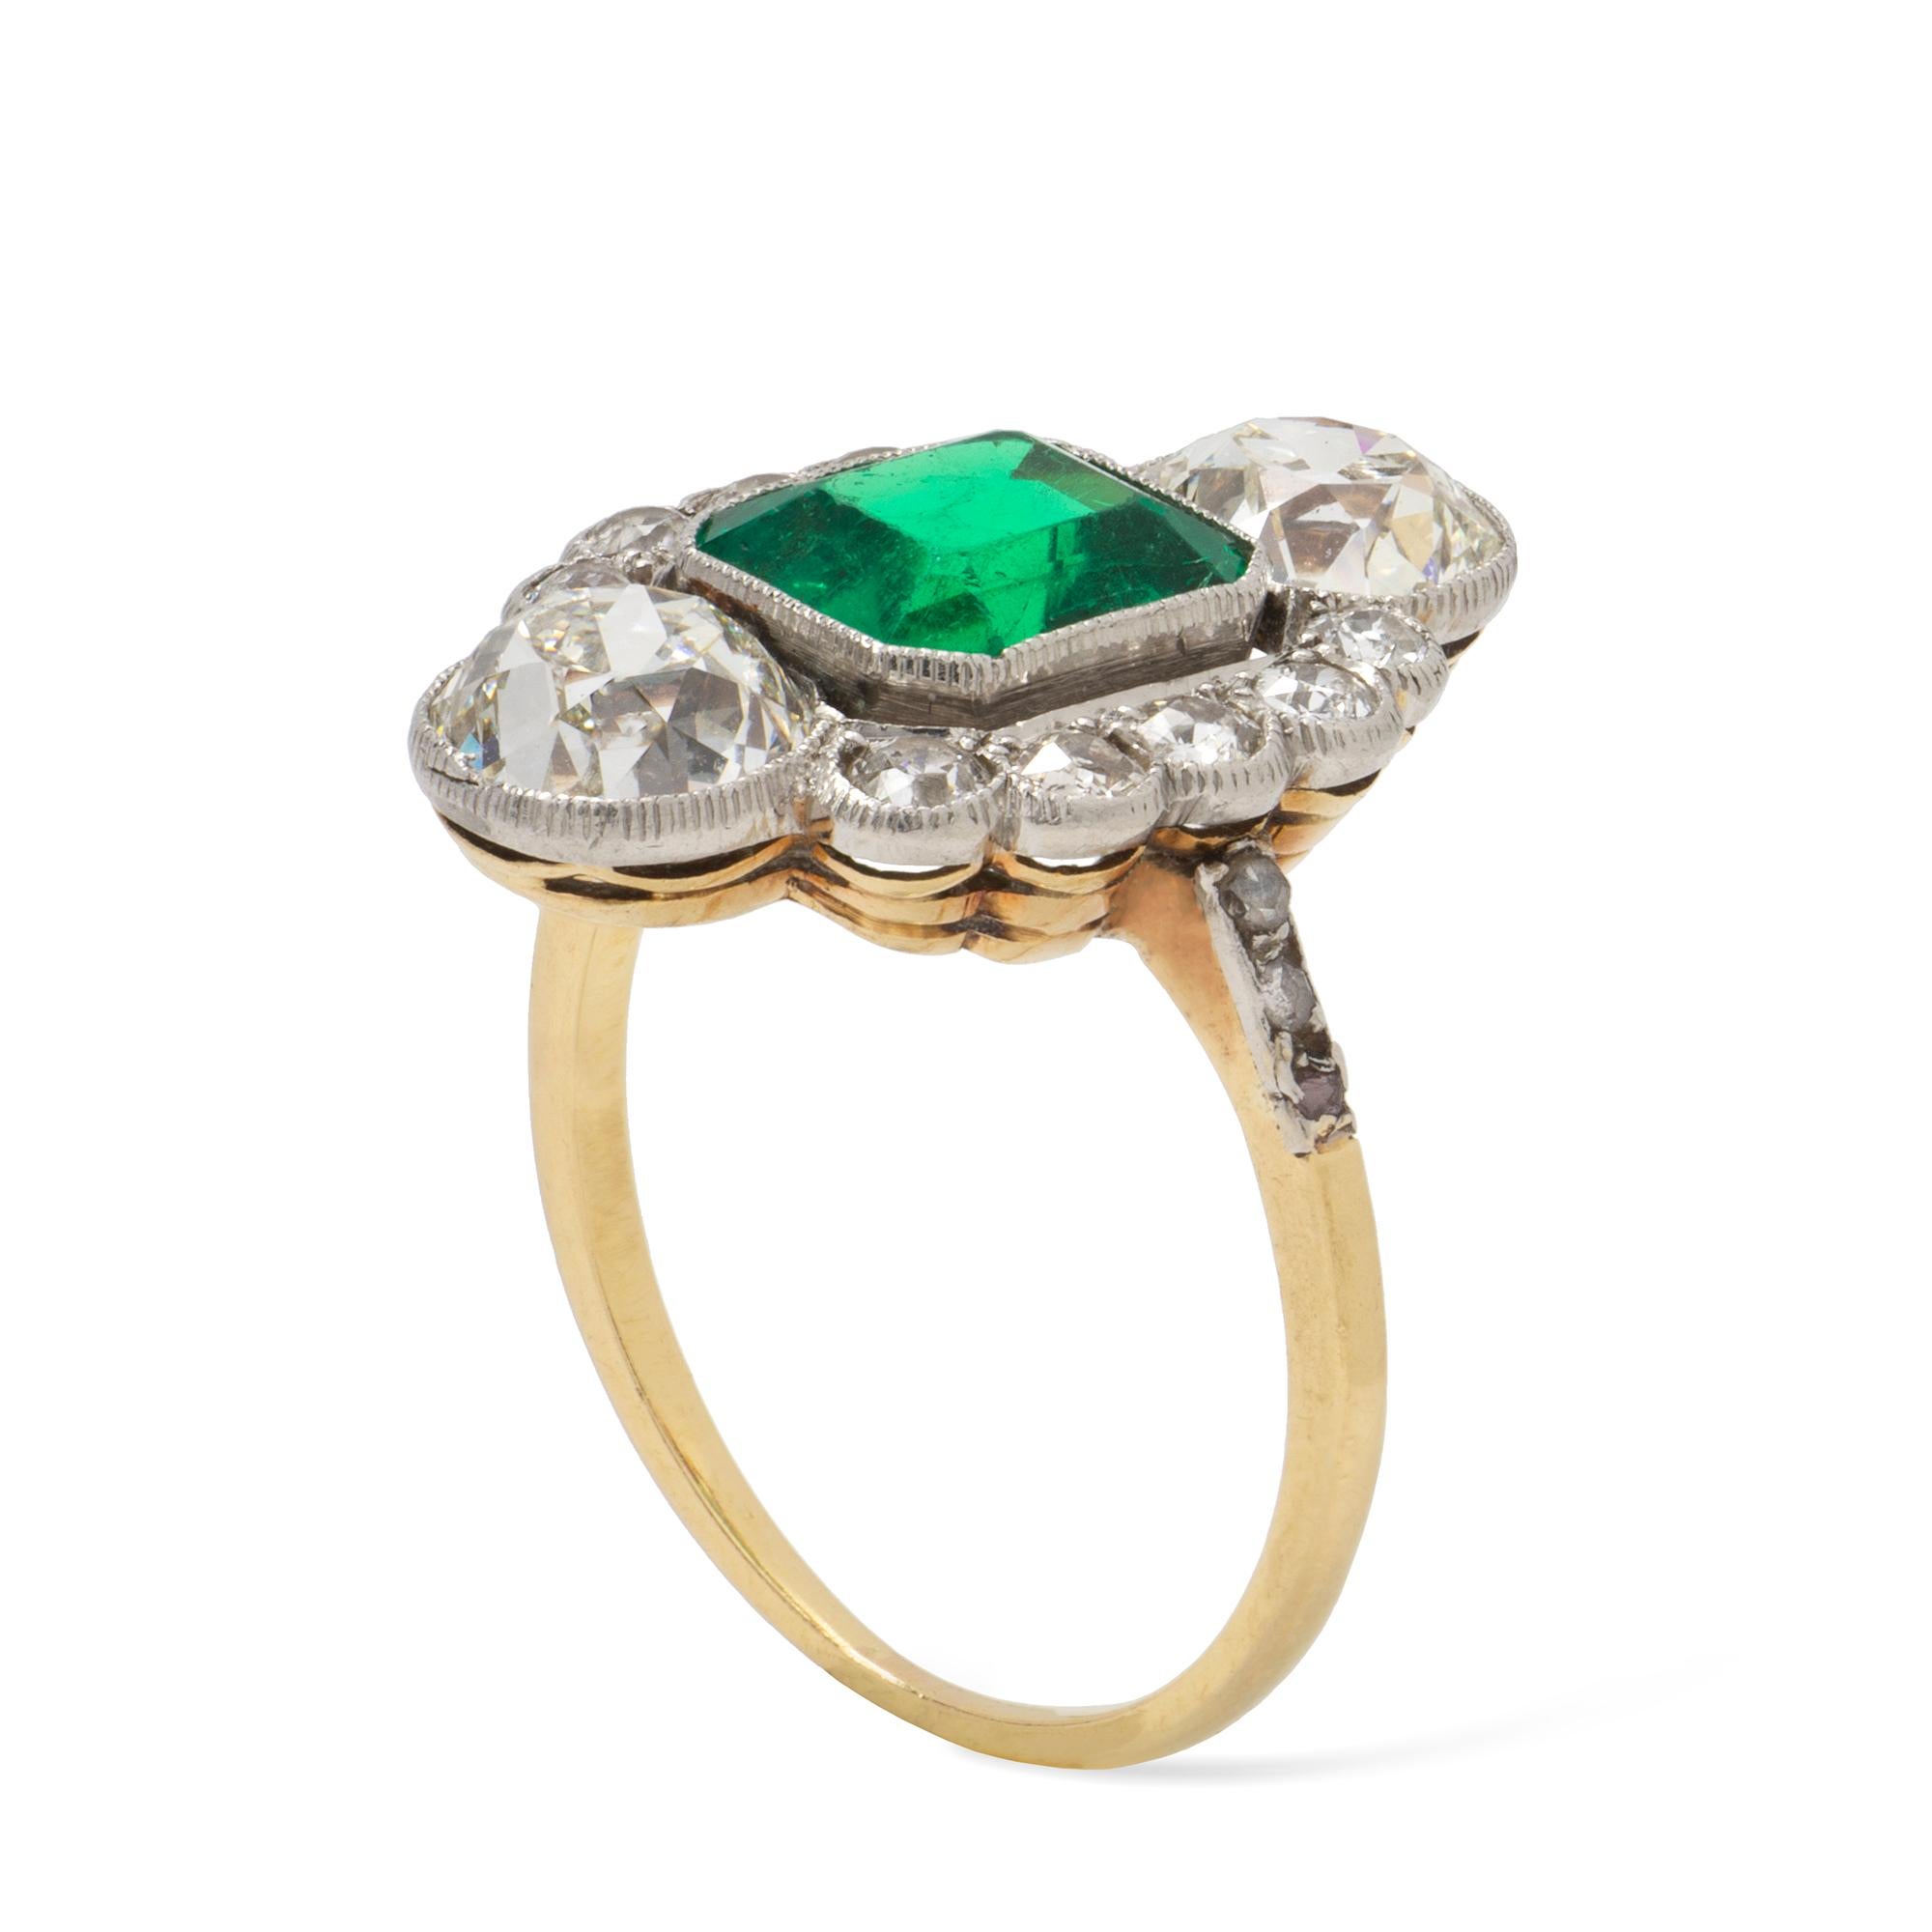 An Art-Deco emerald and diamond ring, the octagonal-cut emerald weighing approximately 2.1 carats accompanied by GCS Report stating to be of Colombian origin, surrounded by ten round old-cut and two old cushion-cut diamonds weighing approximately a